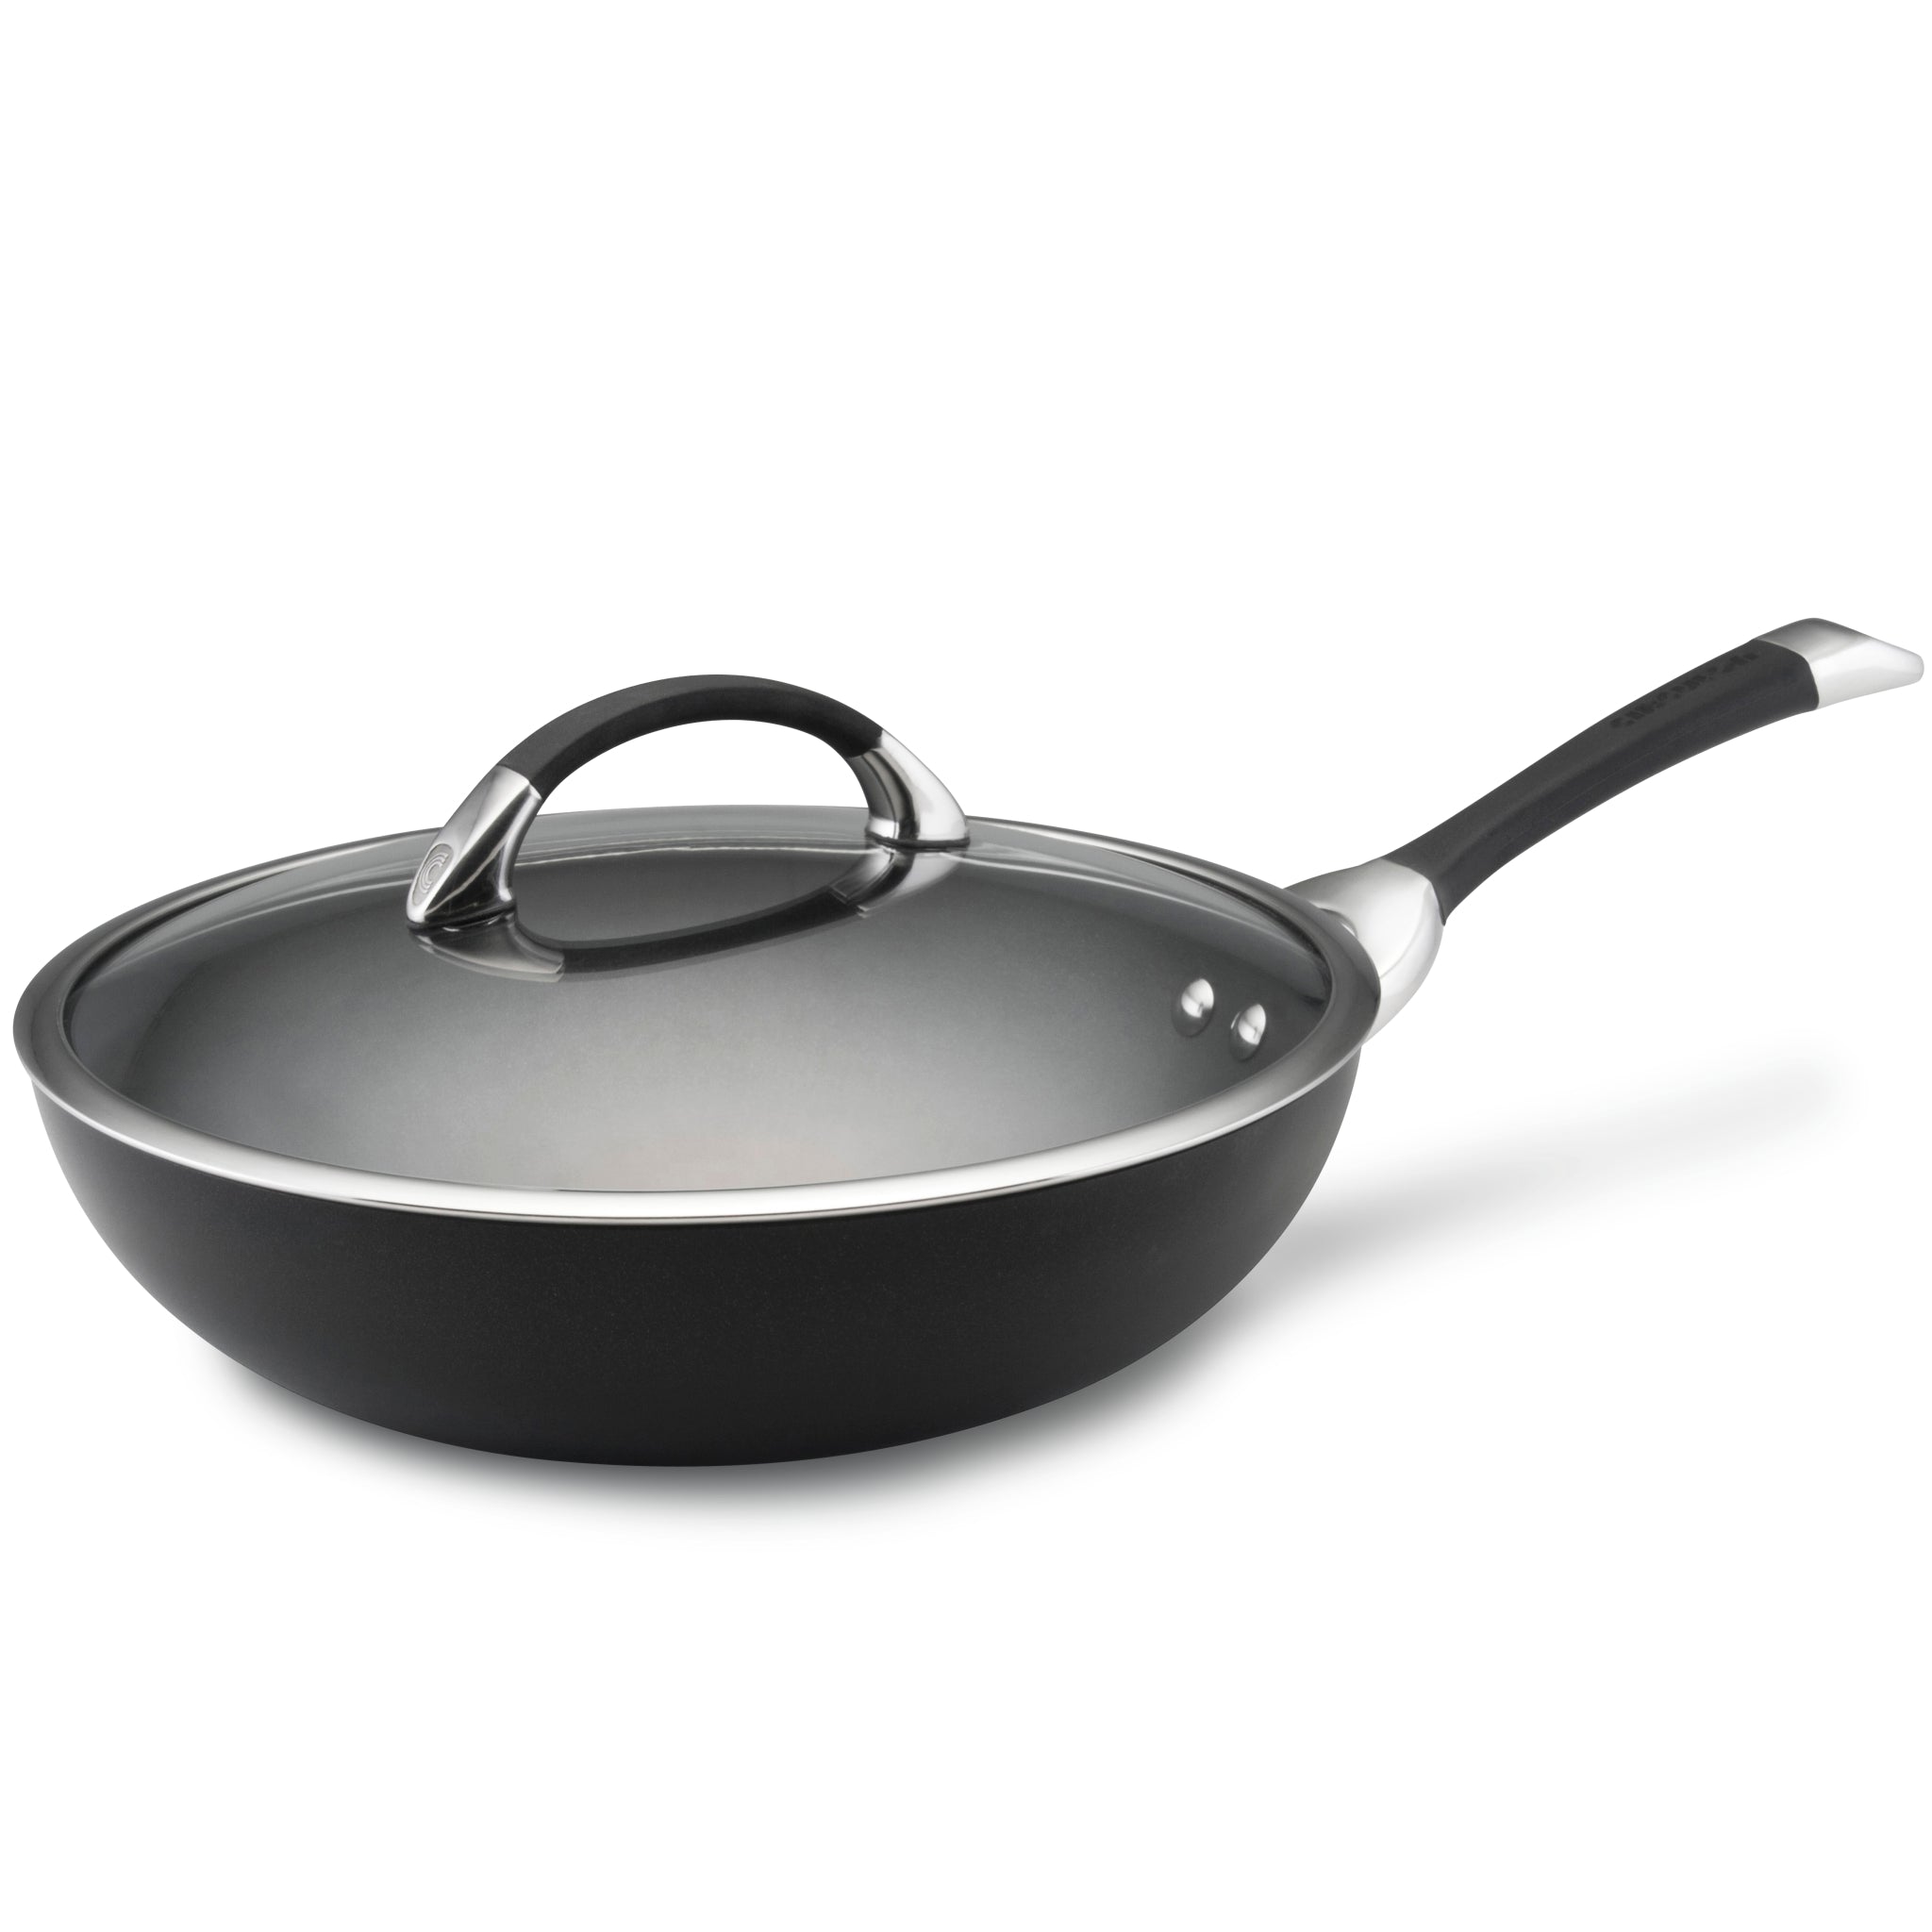 Cook N Home 12 inch Nonstick Saute Fry Pan Professional Hard Anodized  Frying Pan with Lid, 12 inch - Foods Co.